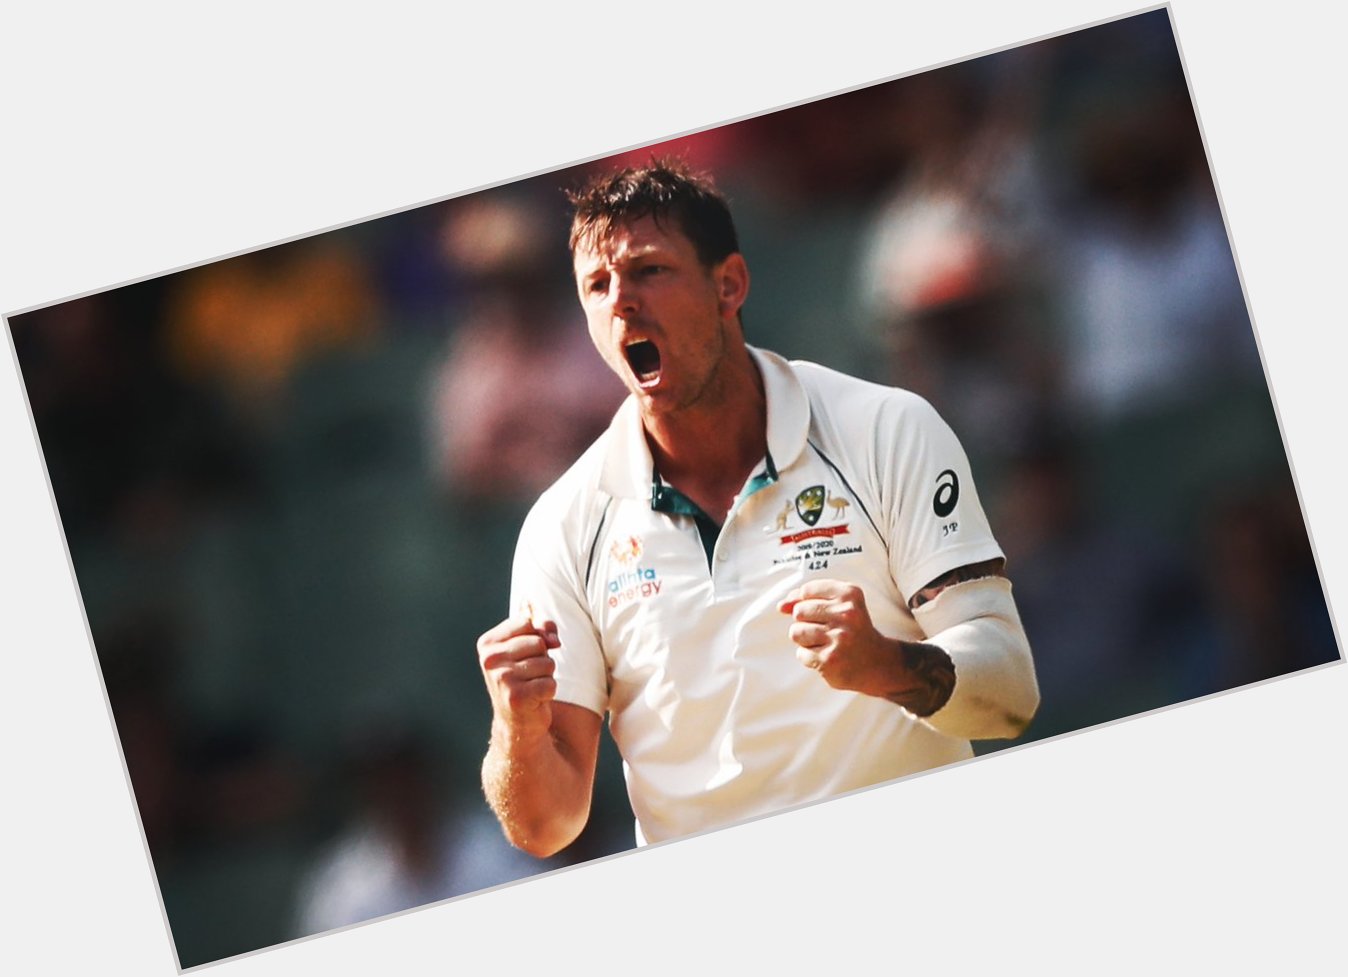 ICC: 81 wickets across 21 Tests at 26.33  Happy 31st birthday to fast bowler James Pattinson 